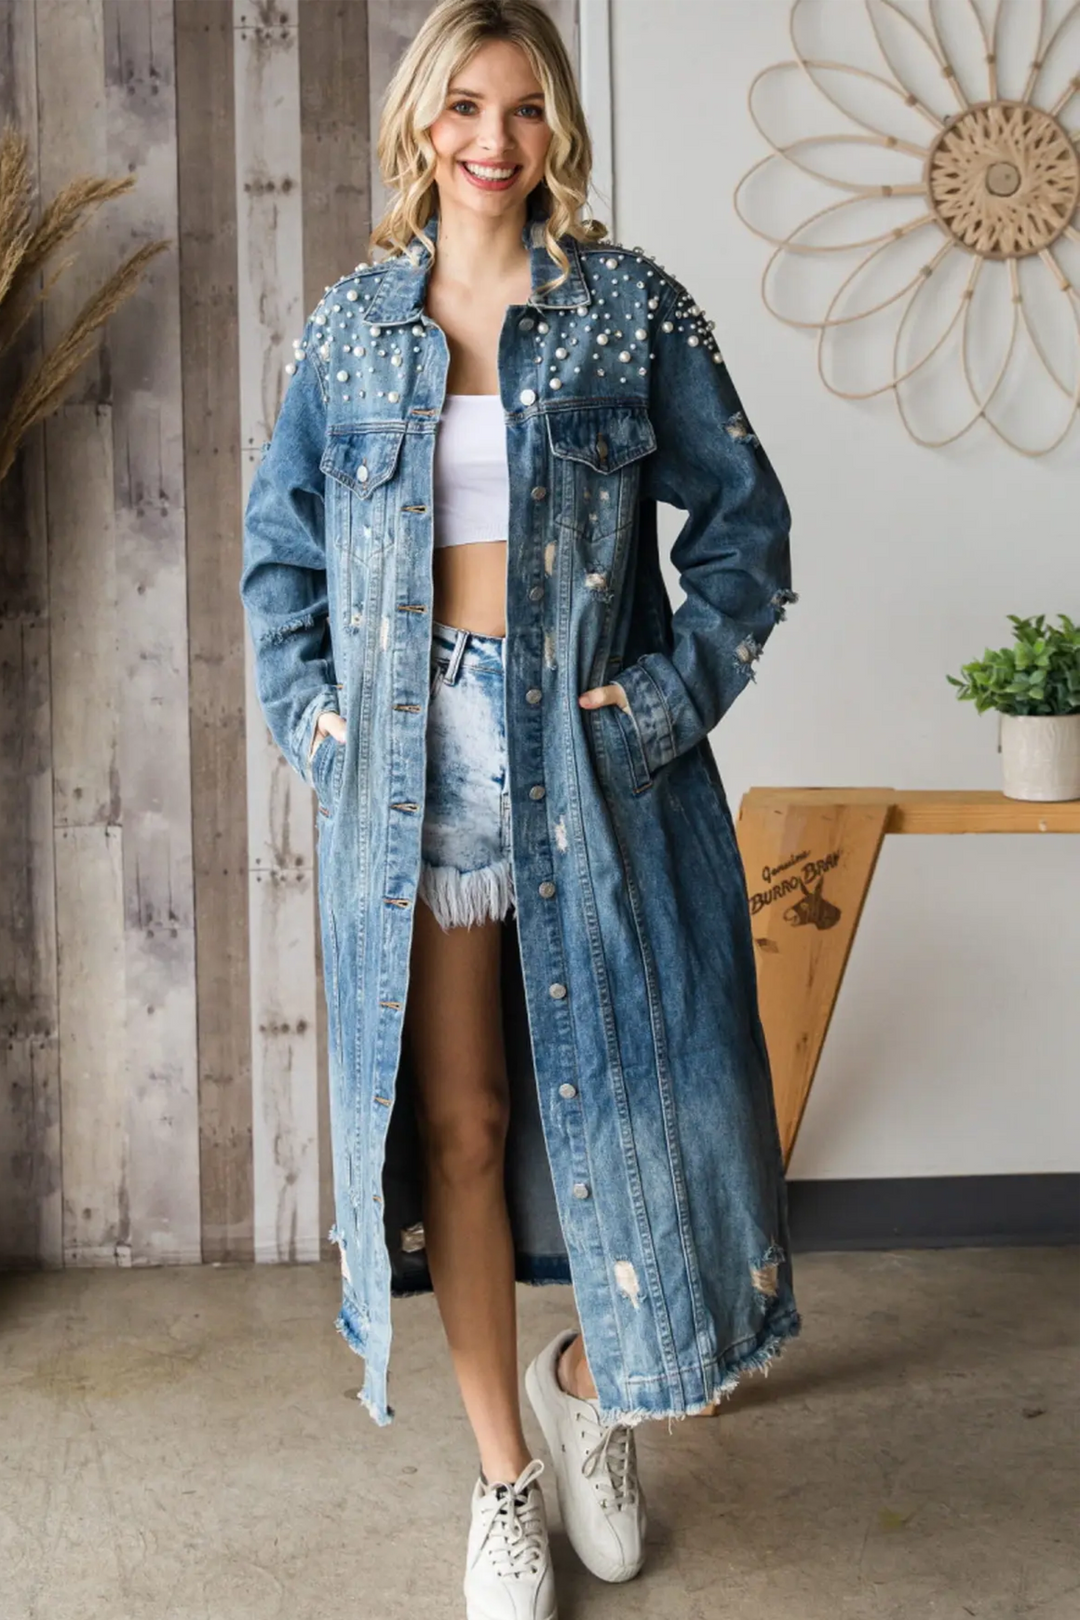 Its eye-catching pearl and rhinestone details, stylish distressed tear stitch design patches and long denim coat form a combination of contemporary style and classic comfort.